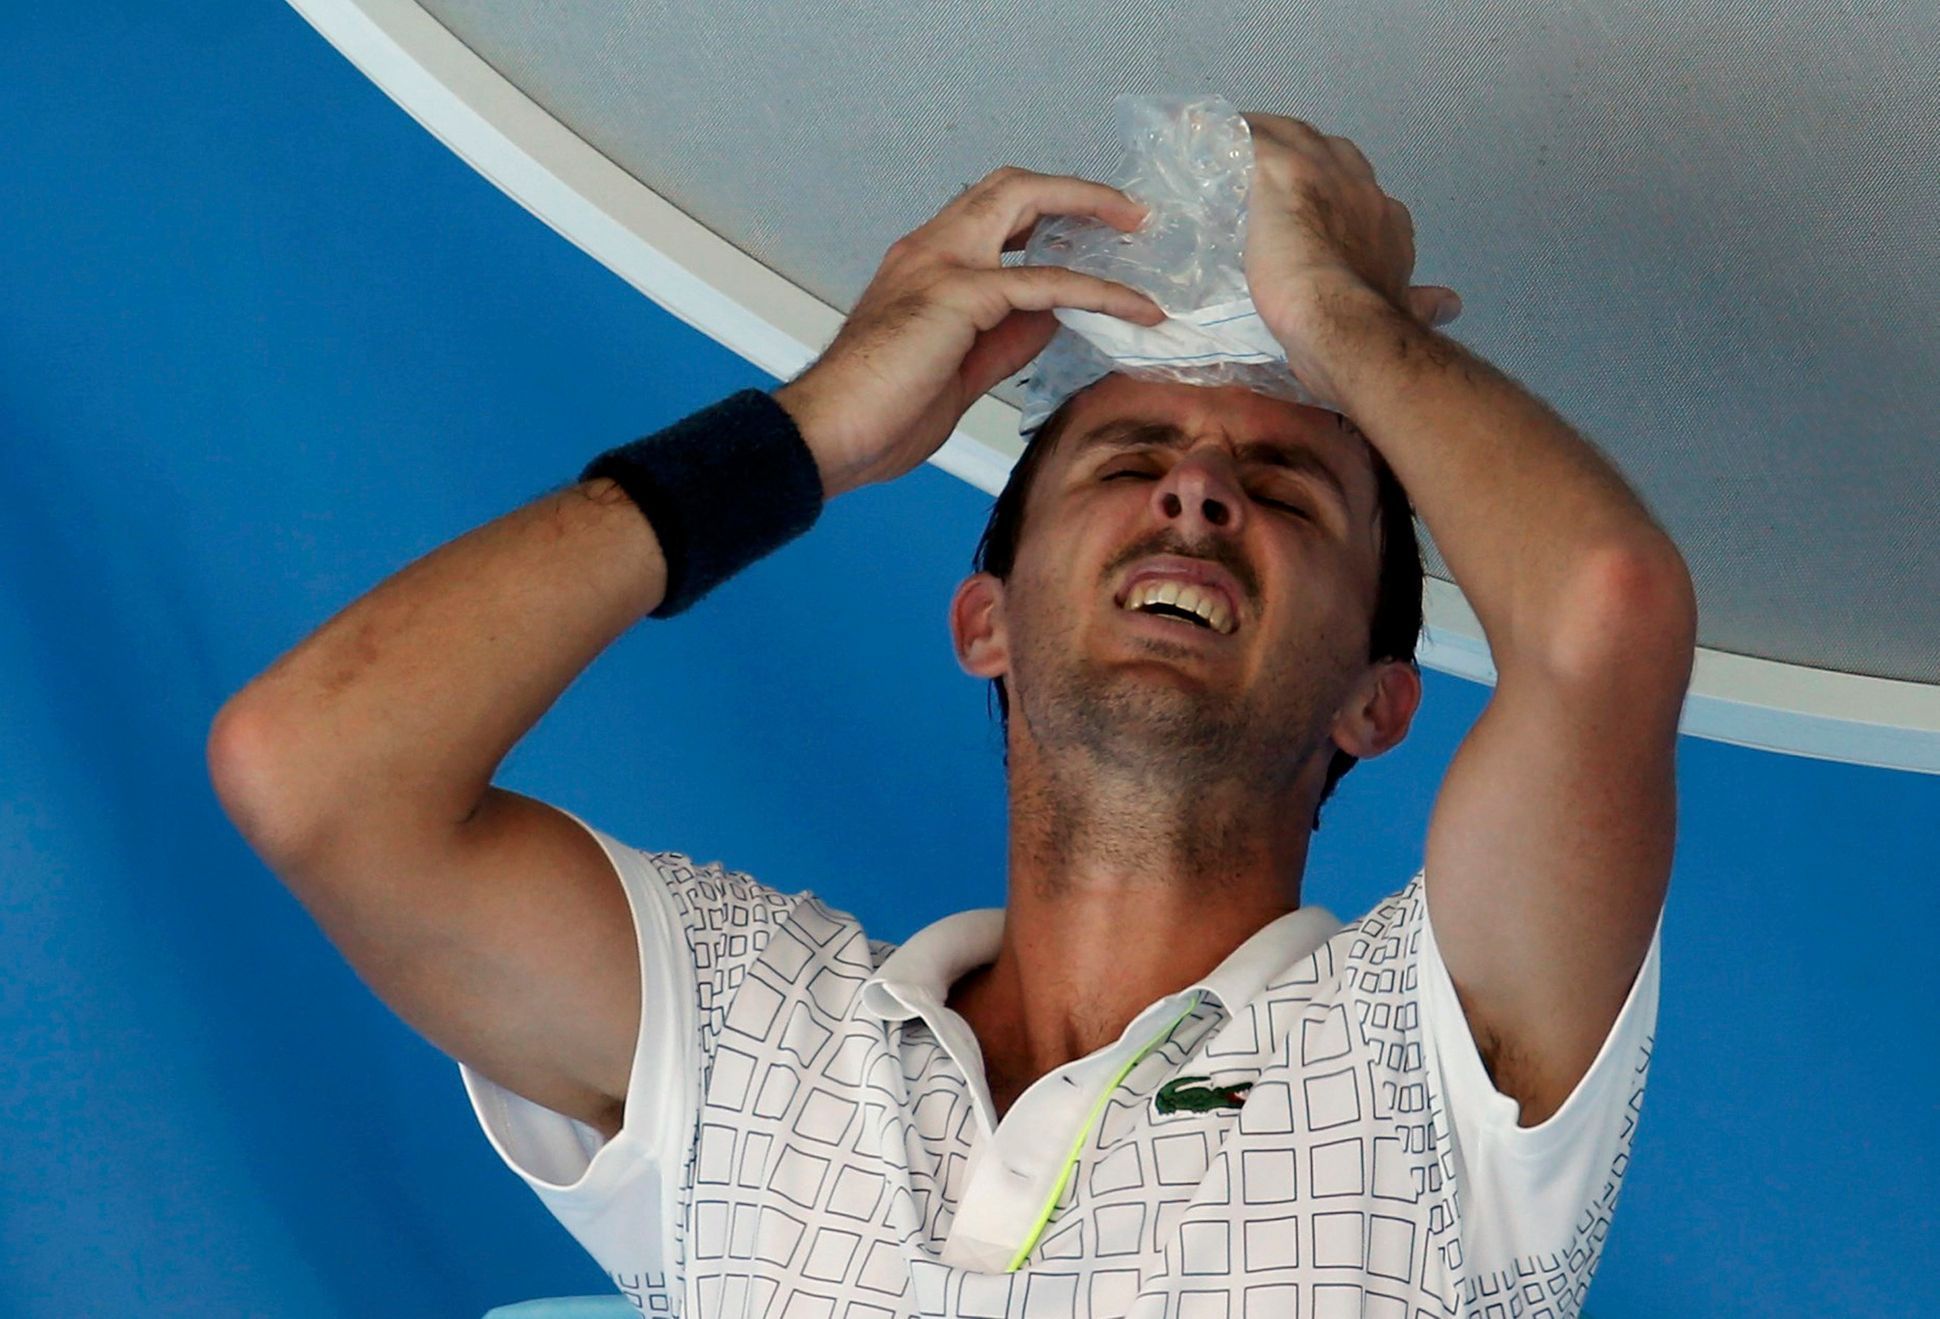 Roger-Vasselin of France holds a bag of ice to his head during a break in play in his men's singles match against Anderson of South Africa at Australian Open 2014 tennis tournament in Melbourne